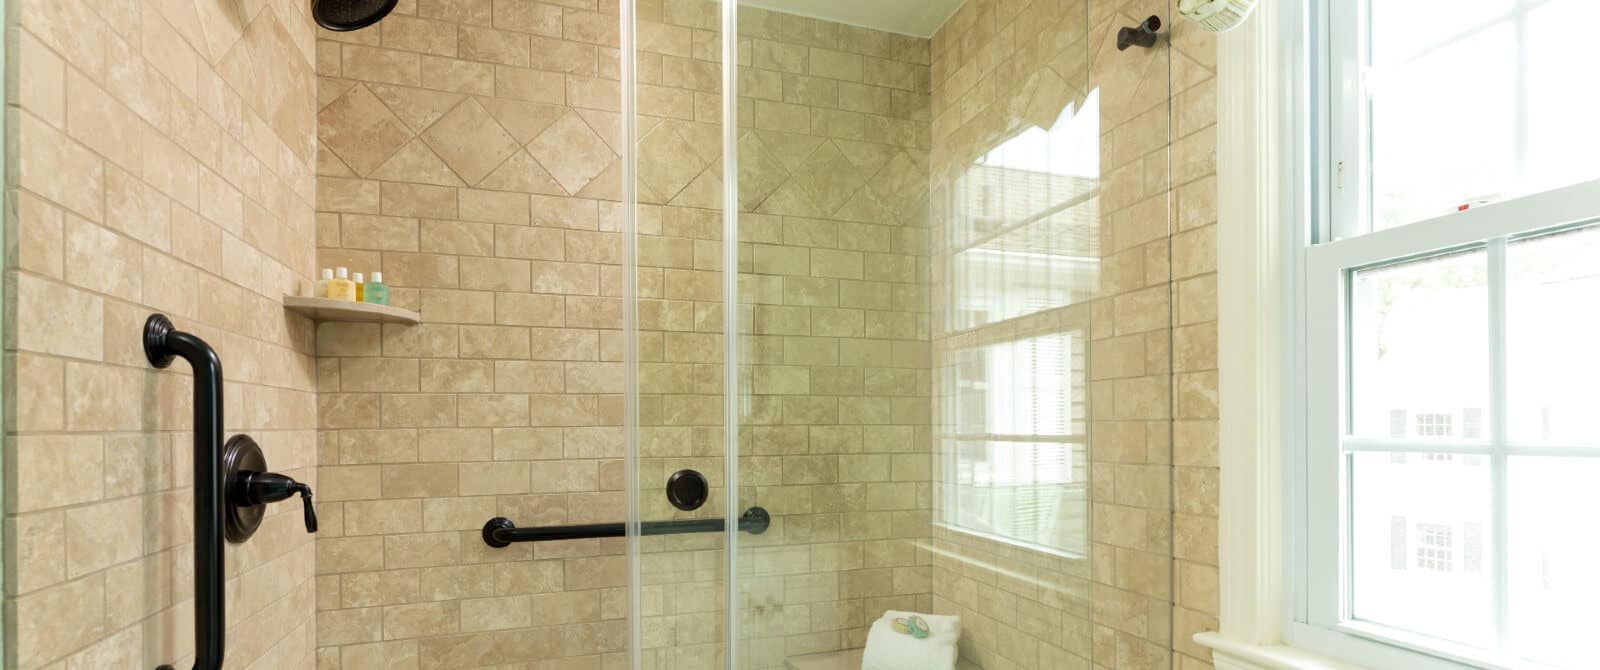 Large tiled shower with black accents in a bathroom with a bright window